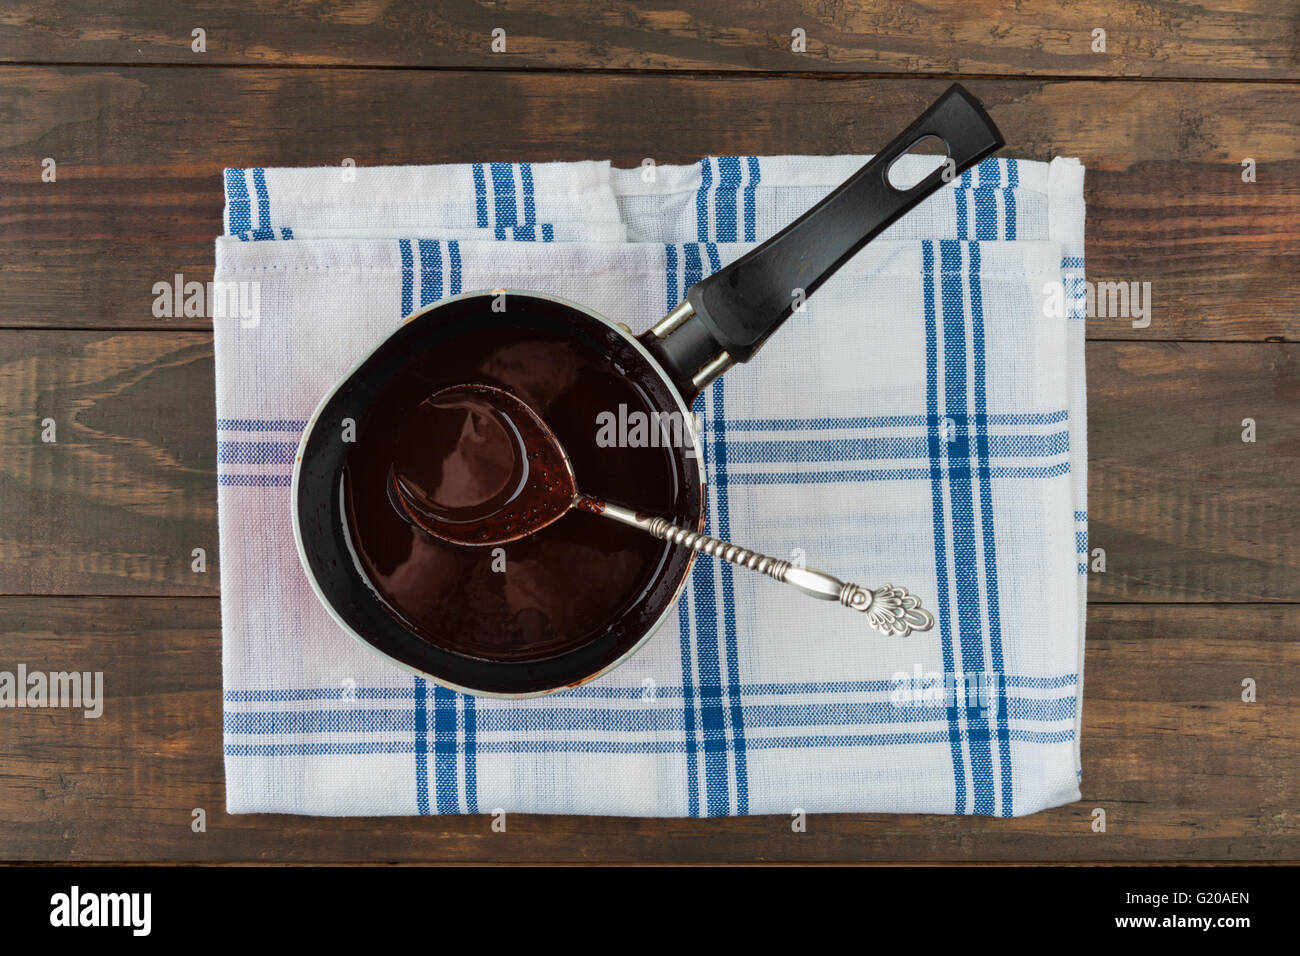 Pan filled with dark melted chocolate with vintage silver spoon on checkered napkin and wooden table. Top view Stock Photo